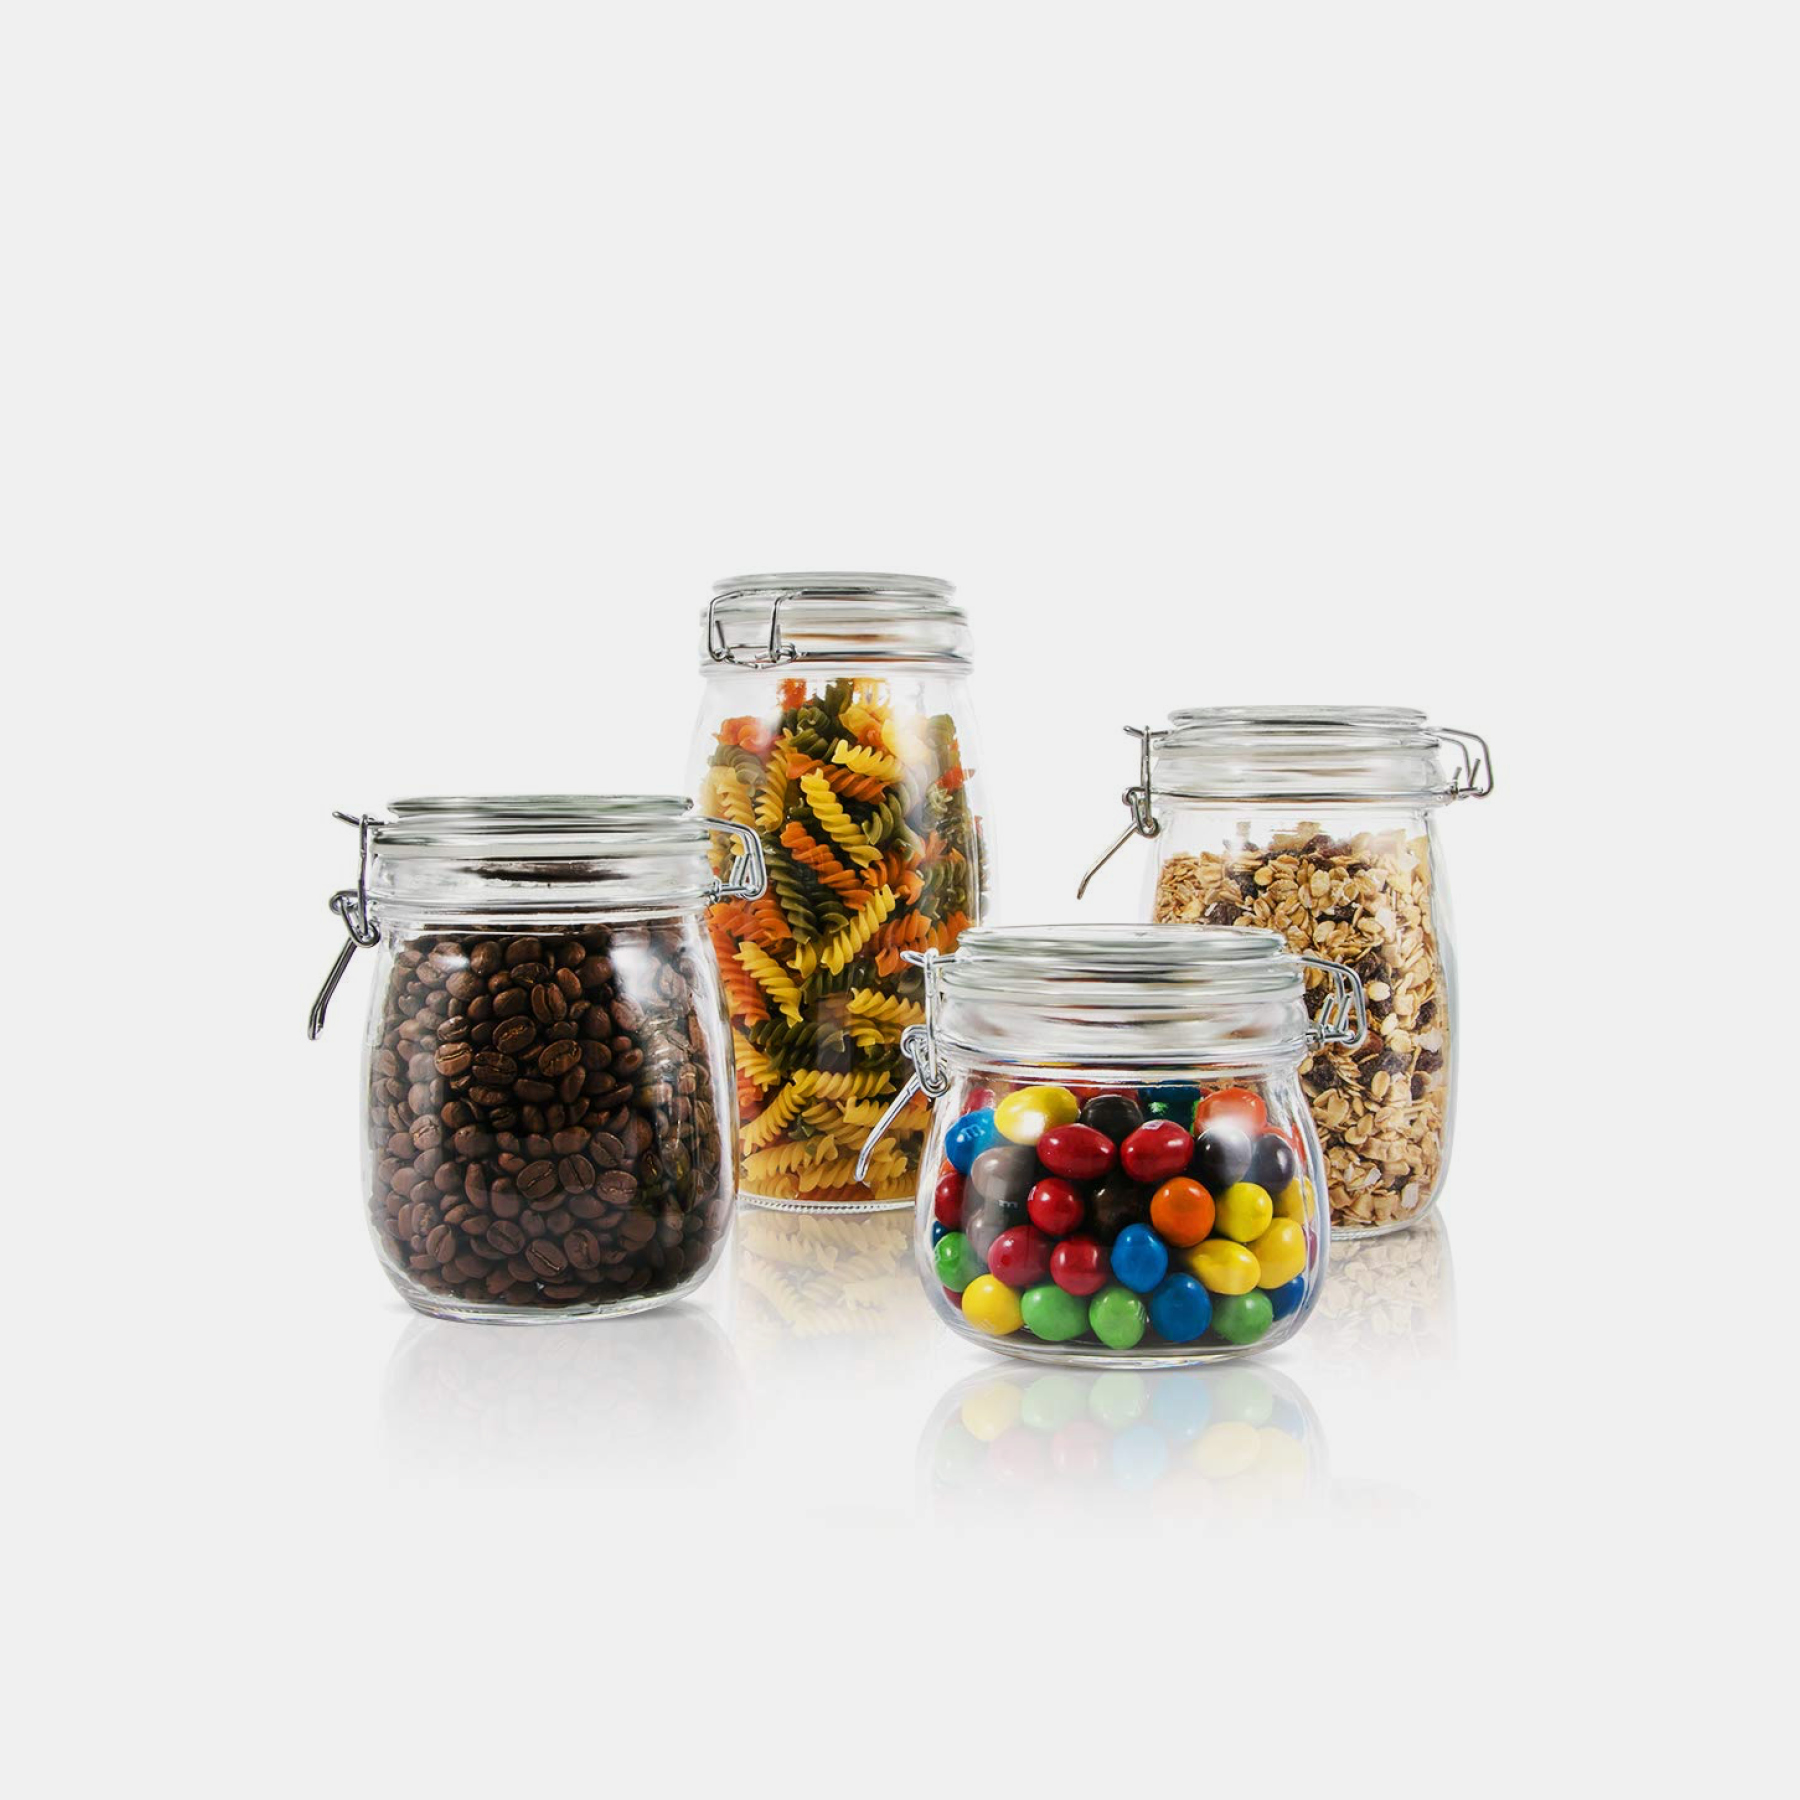 ALL-SORTS-OF-GLASS-STORAGE-CONTAINERS